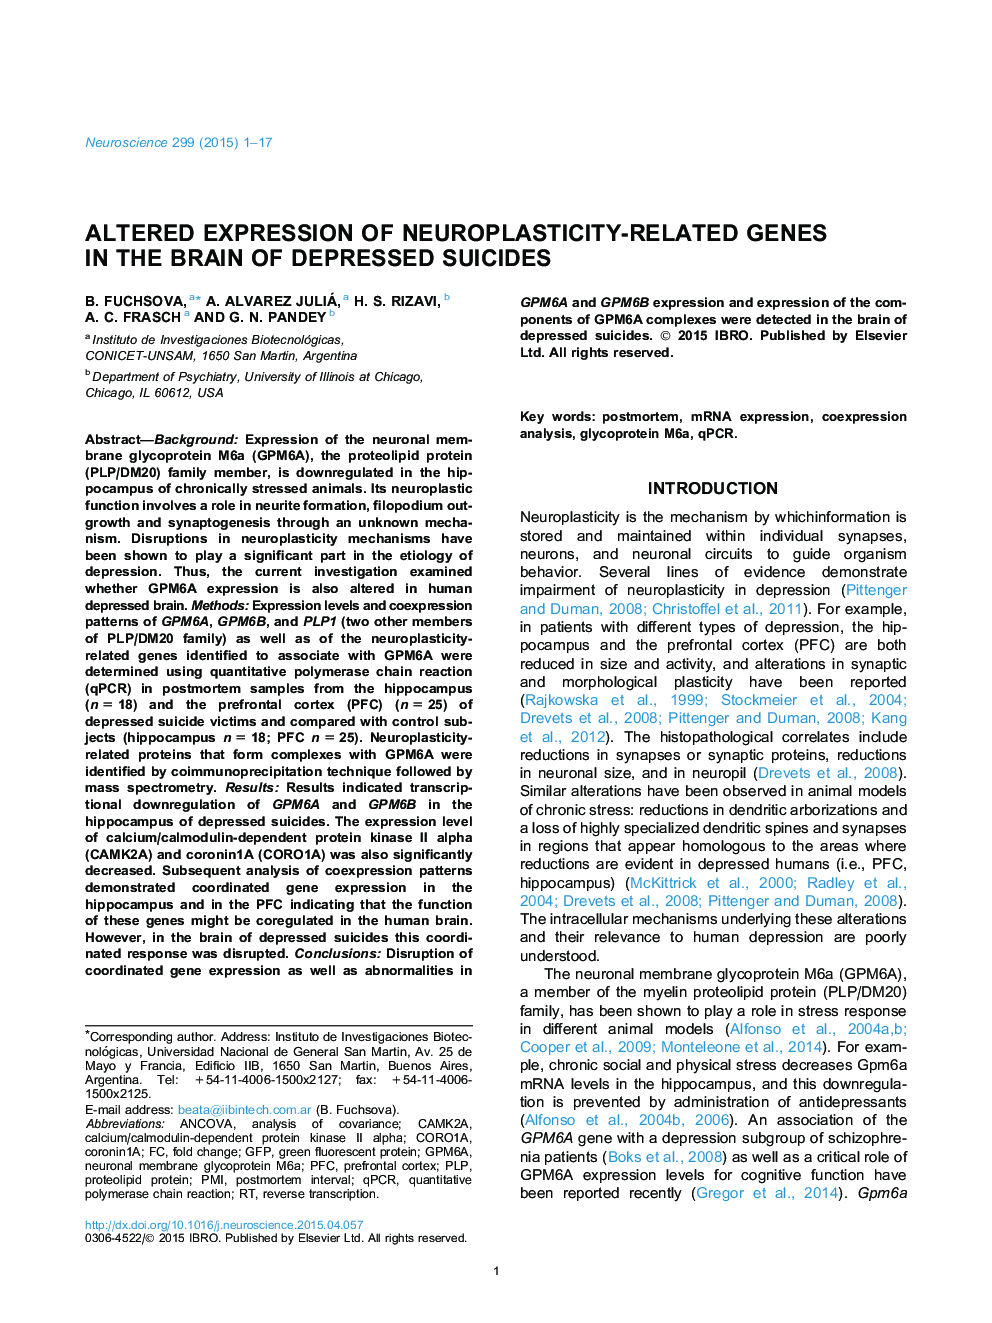 Altered expression of neuroplasticity-related genes in the brain of depressed suicides